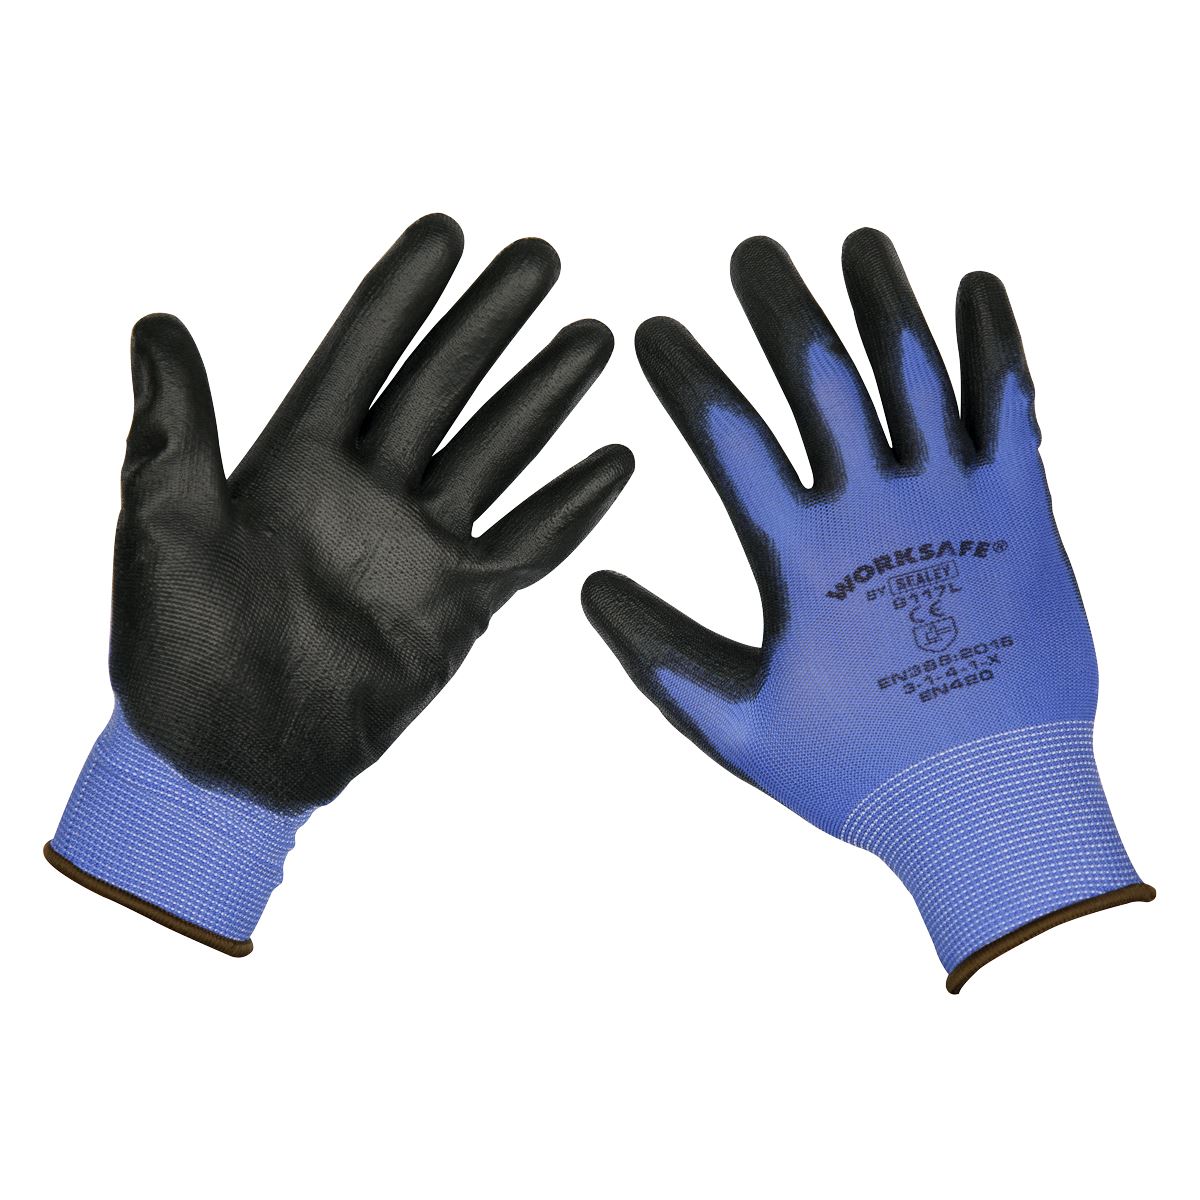 Worksafe by Sealey Lightweight Precision Grip Gloves (Large) - Pair